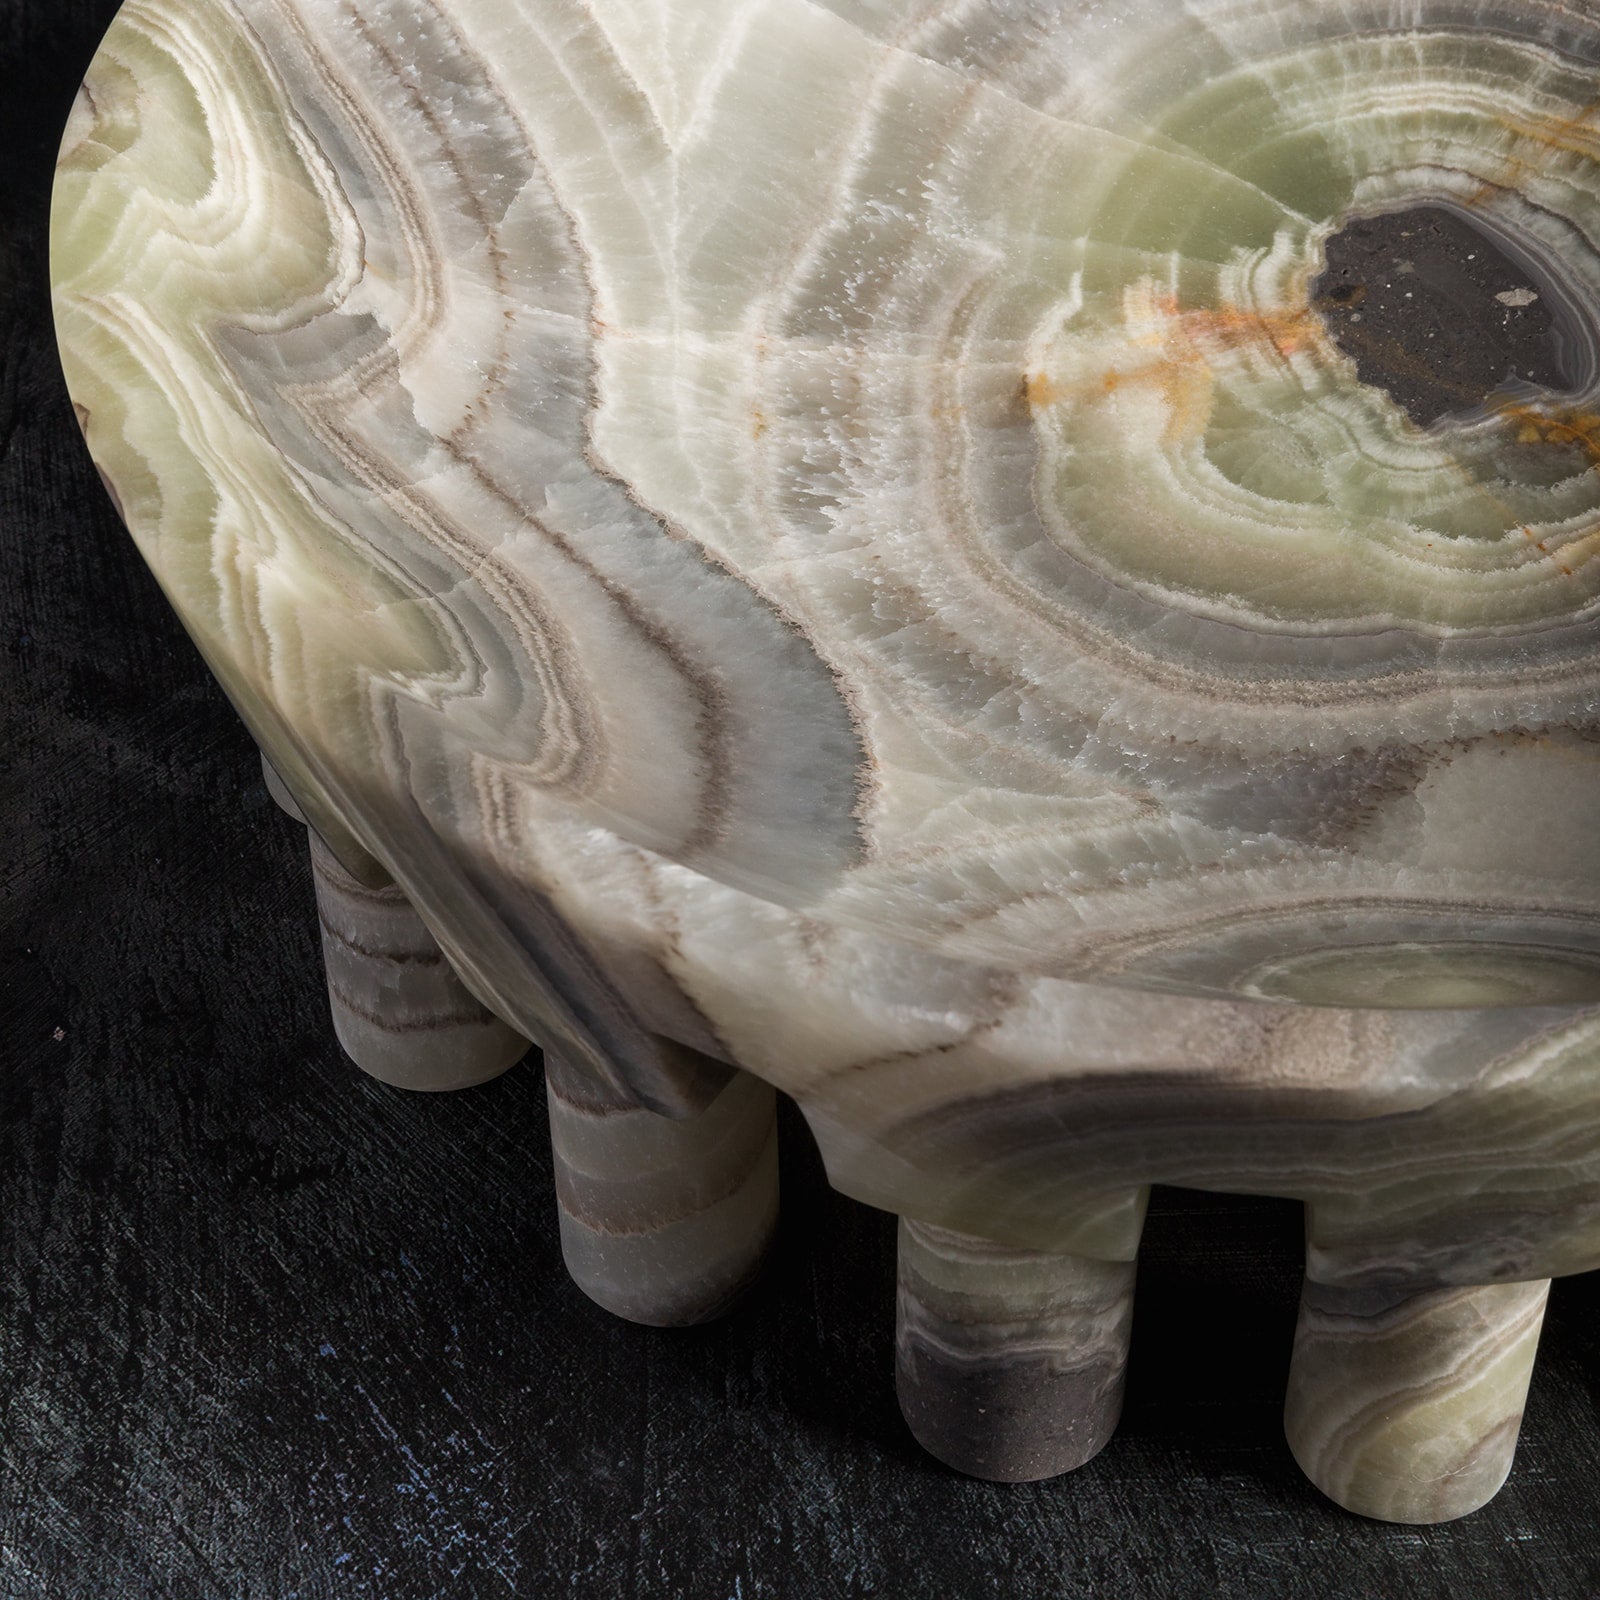 Luxury stone bowl made from green onyx